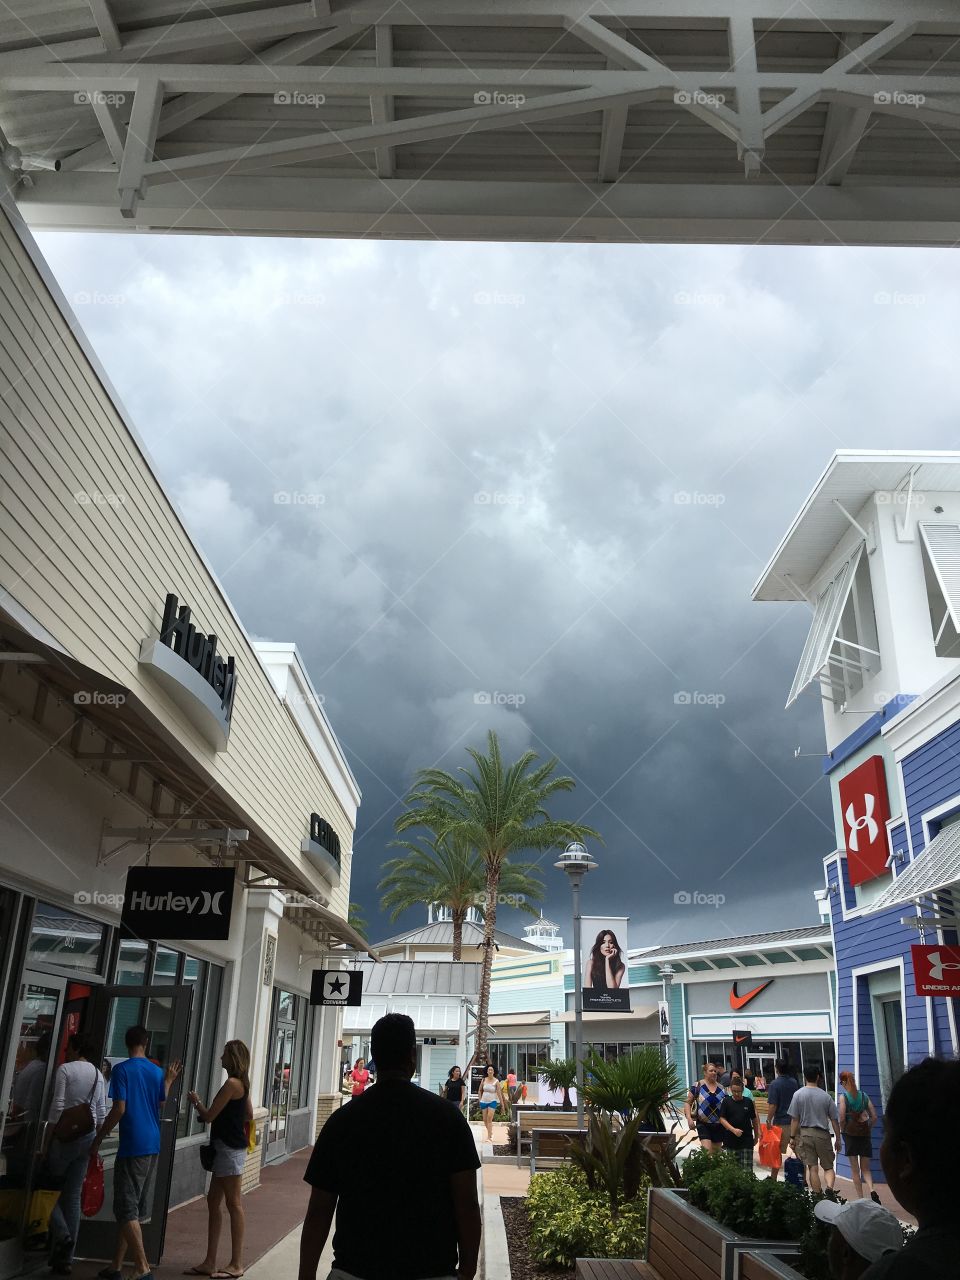 Prime outlet mall Wesley chapel fl